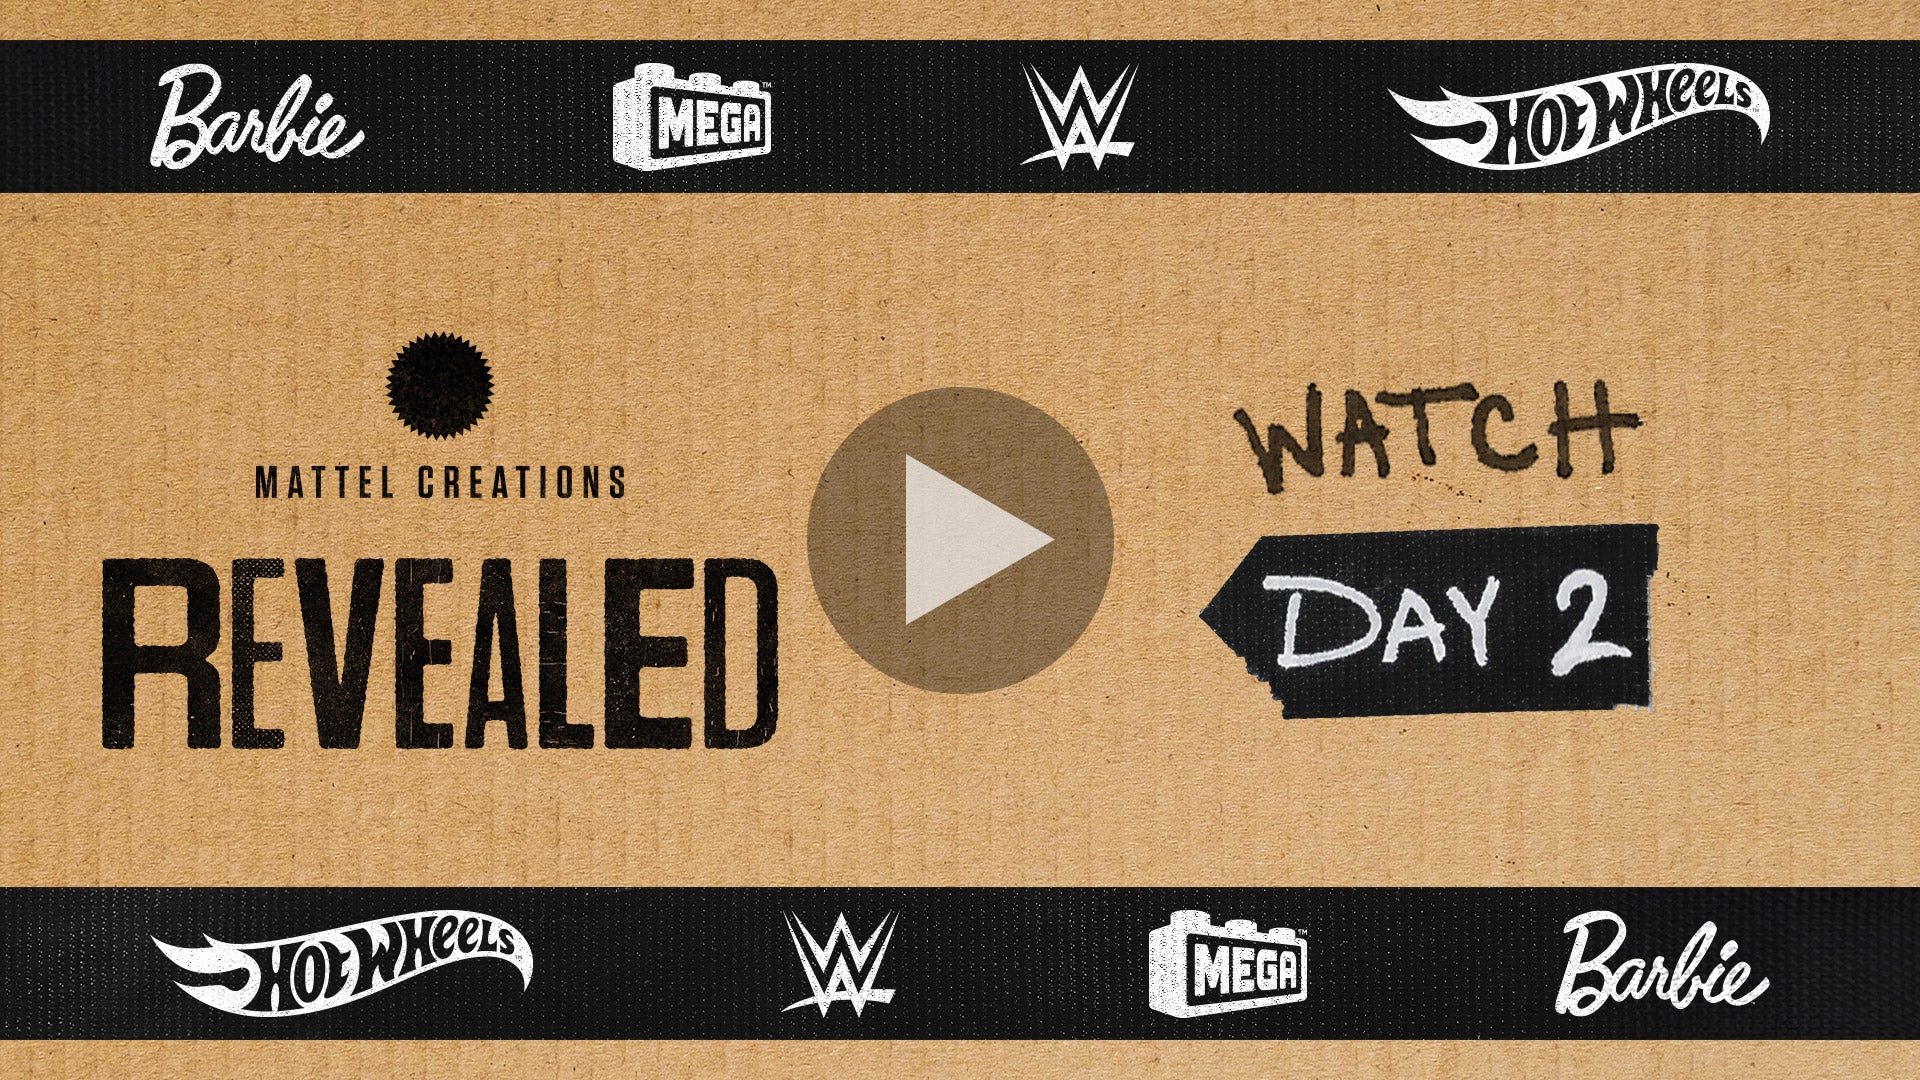 Mattel Creations Revealed: Watch Day 2